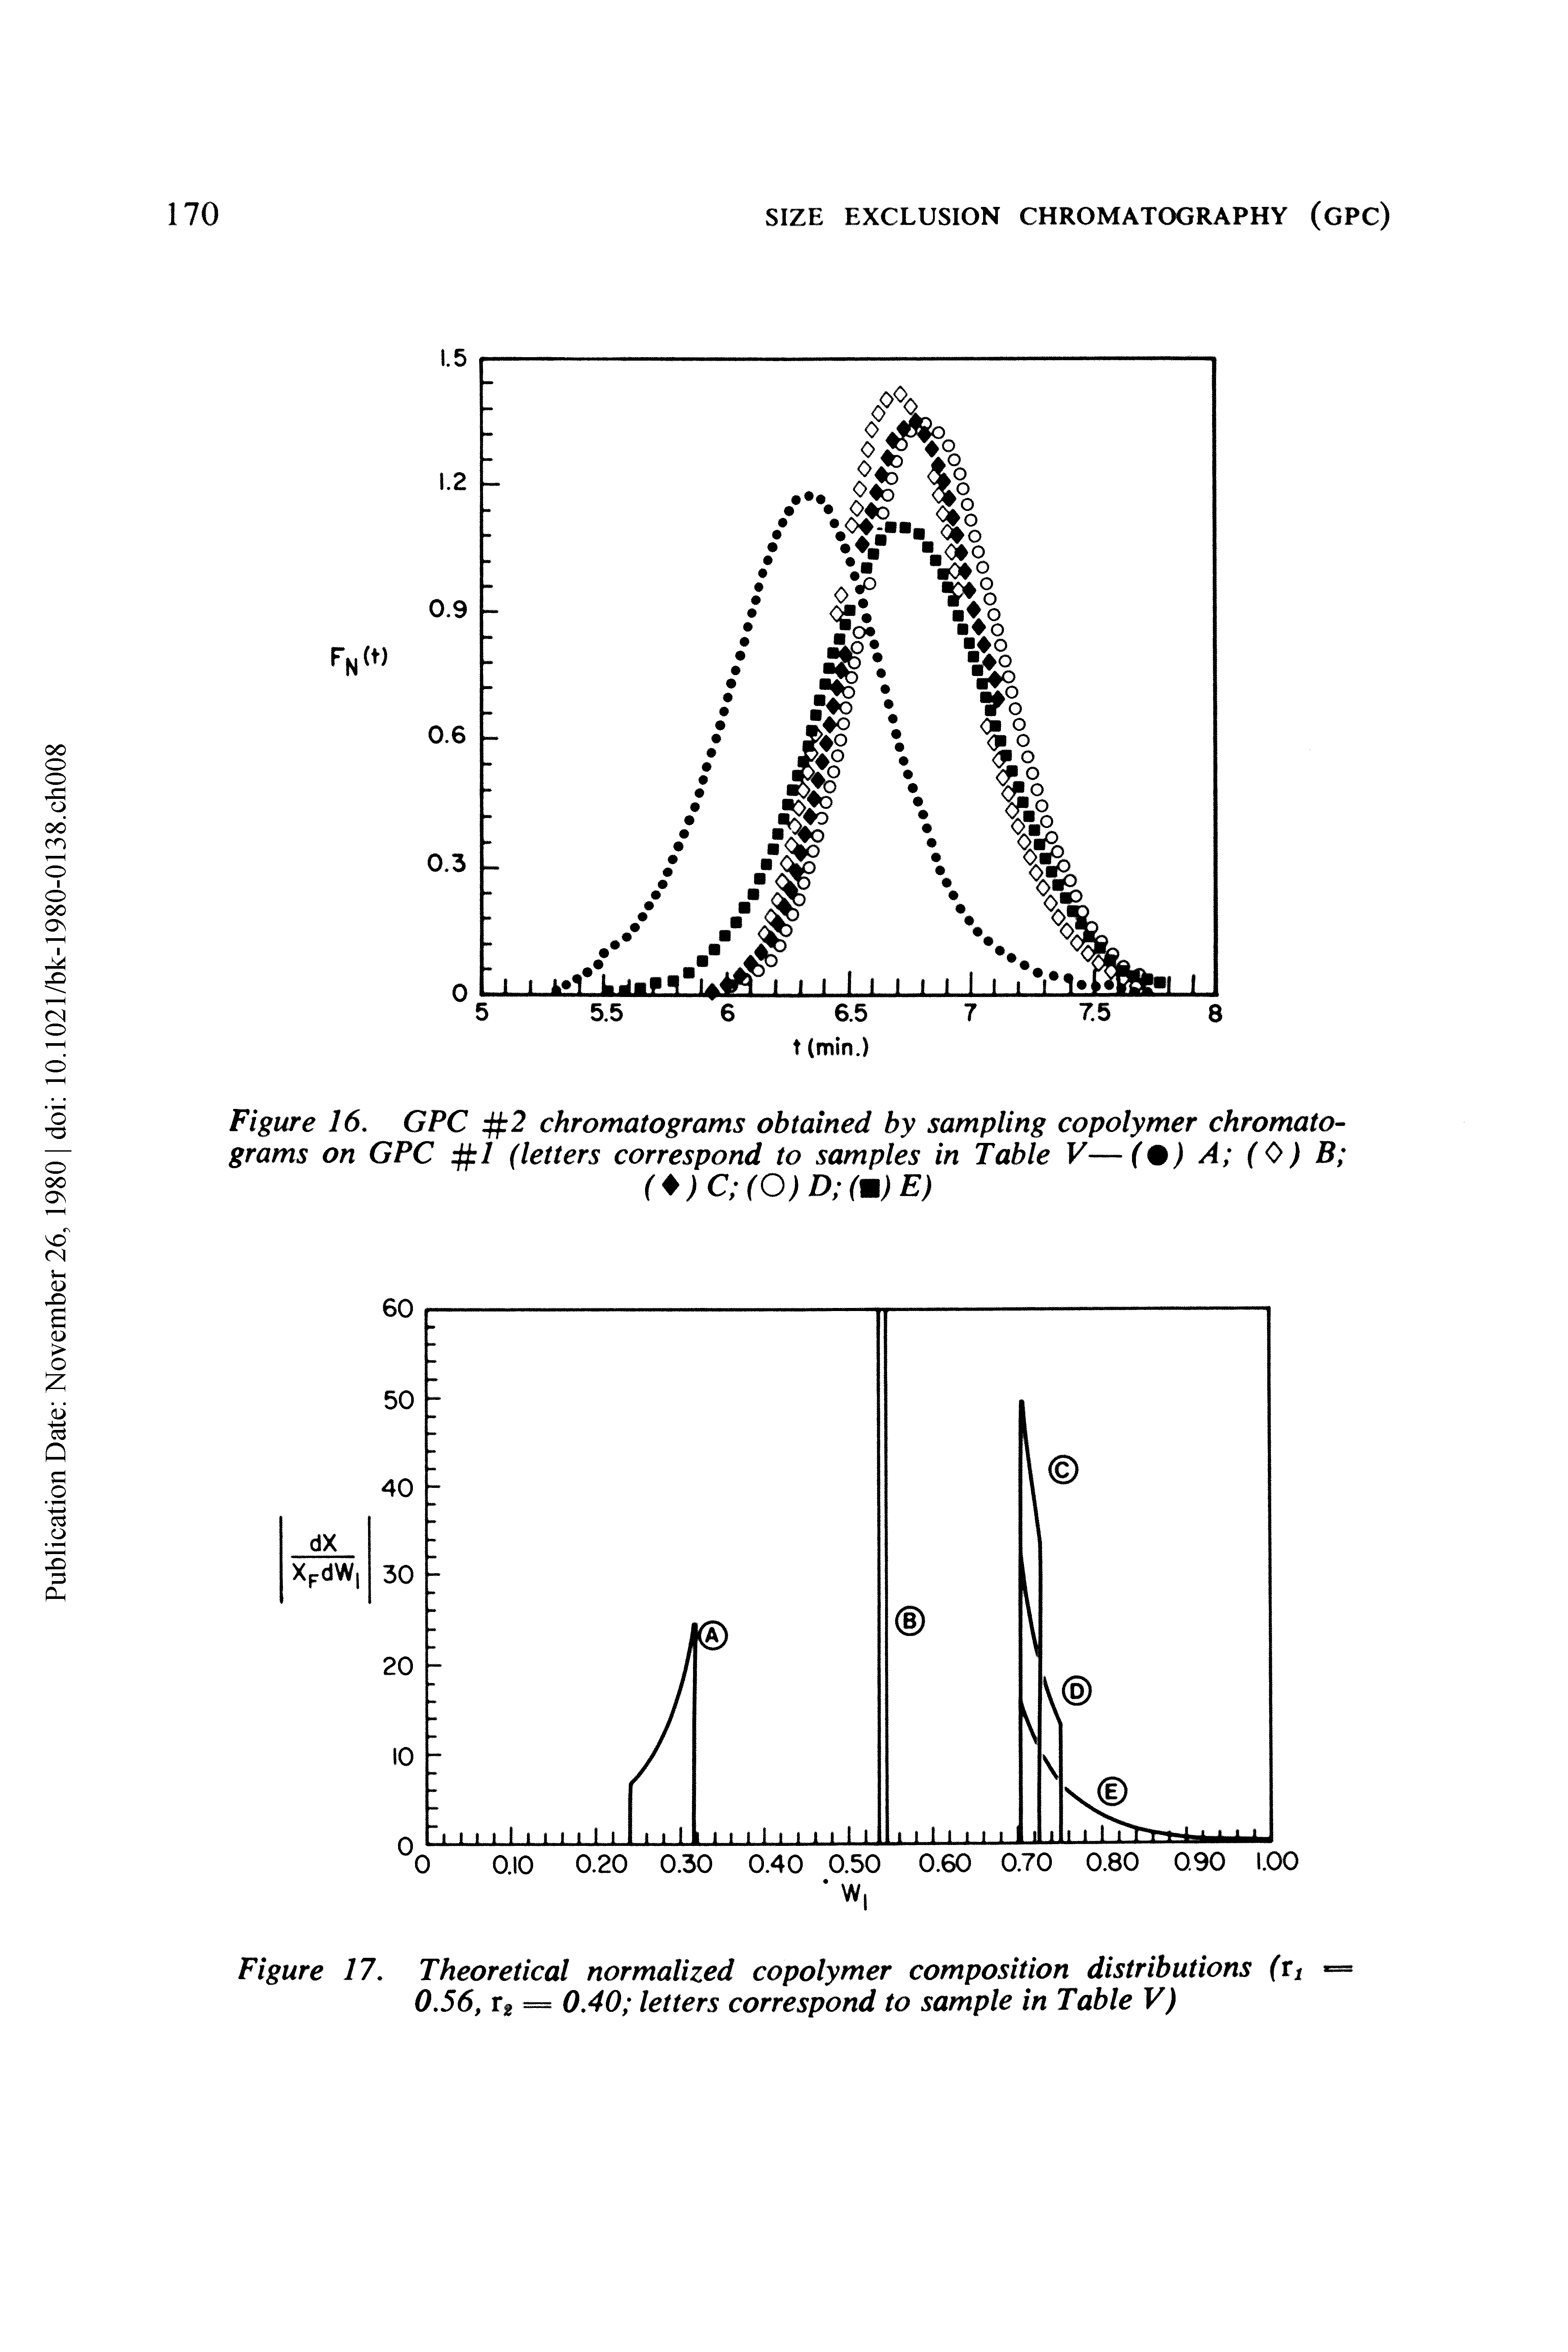 Figure 16. GPC 2 chromatograms obtained by sampling copolymer chromatograms on GPC 1 (letters correspond to samples in Table V—(%) A (0) B ...